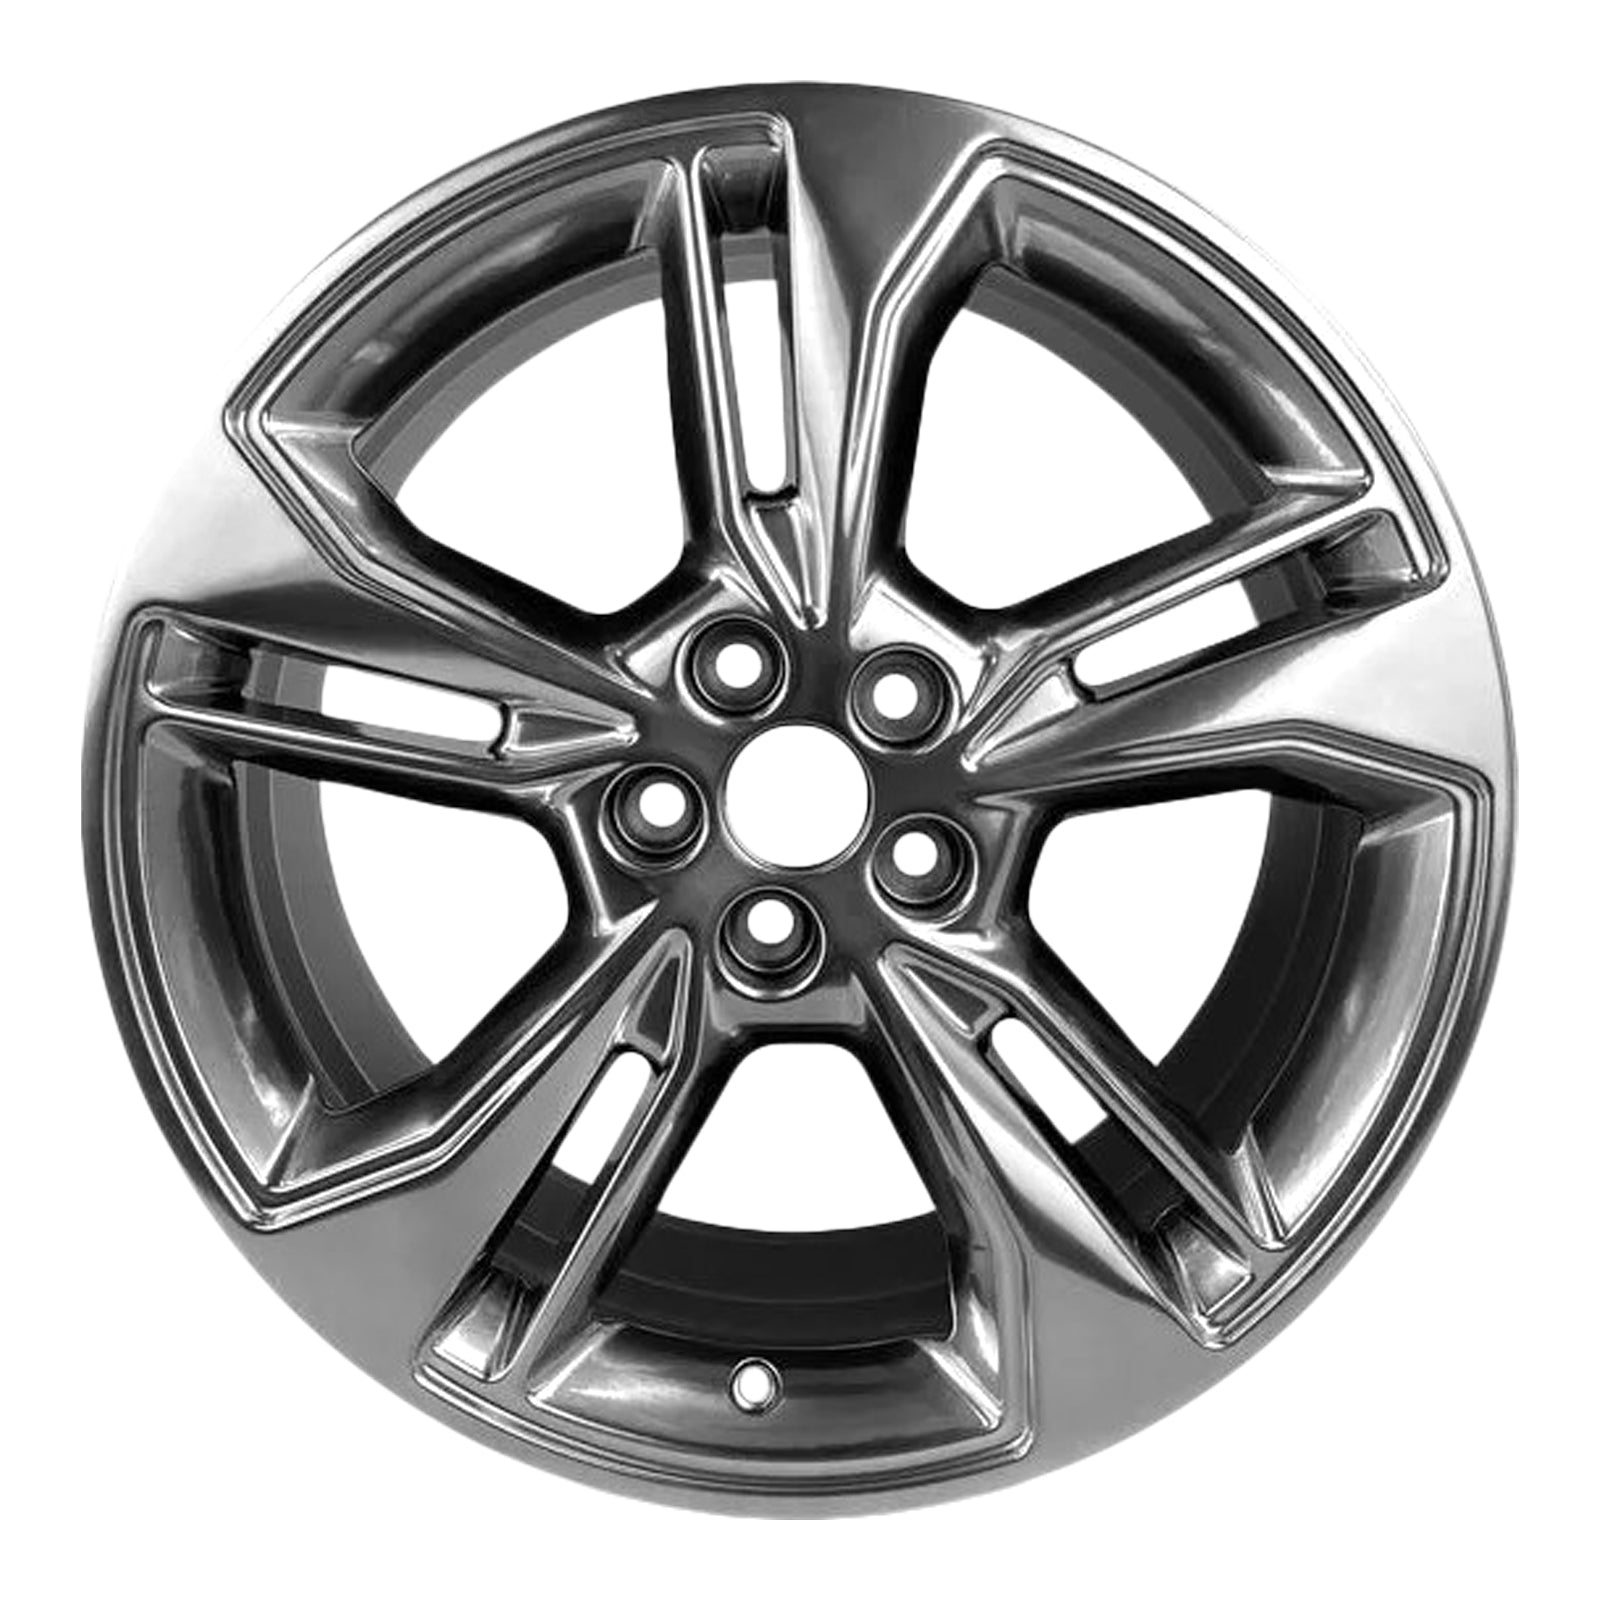 2019 Ford Fusion New 19" Replacement Wheel Rim RW10123H